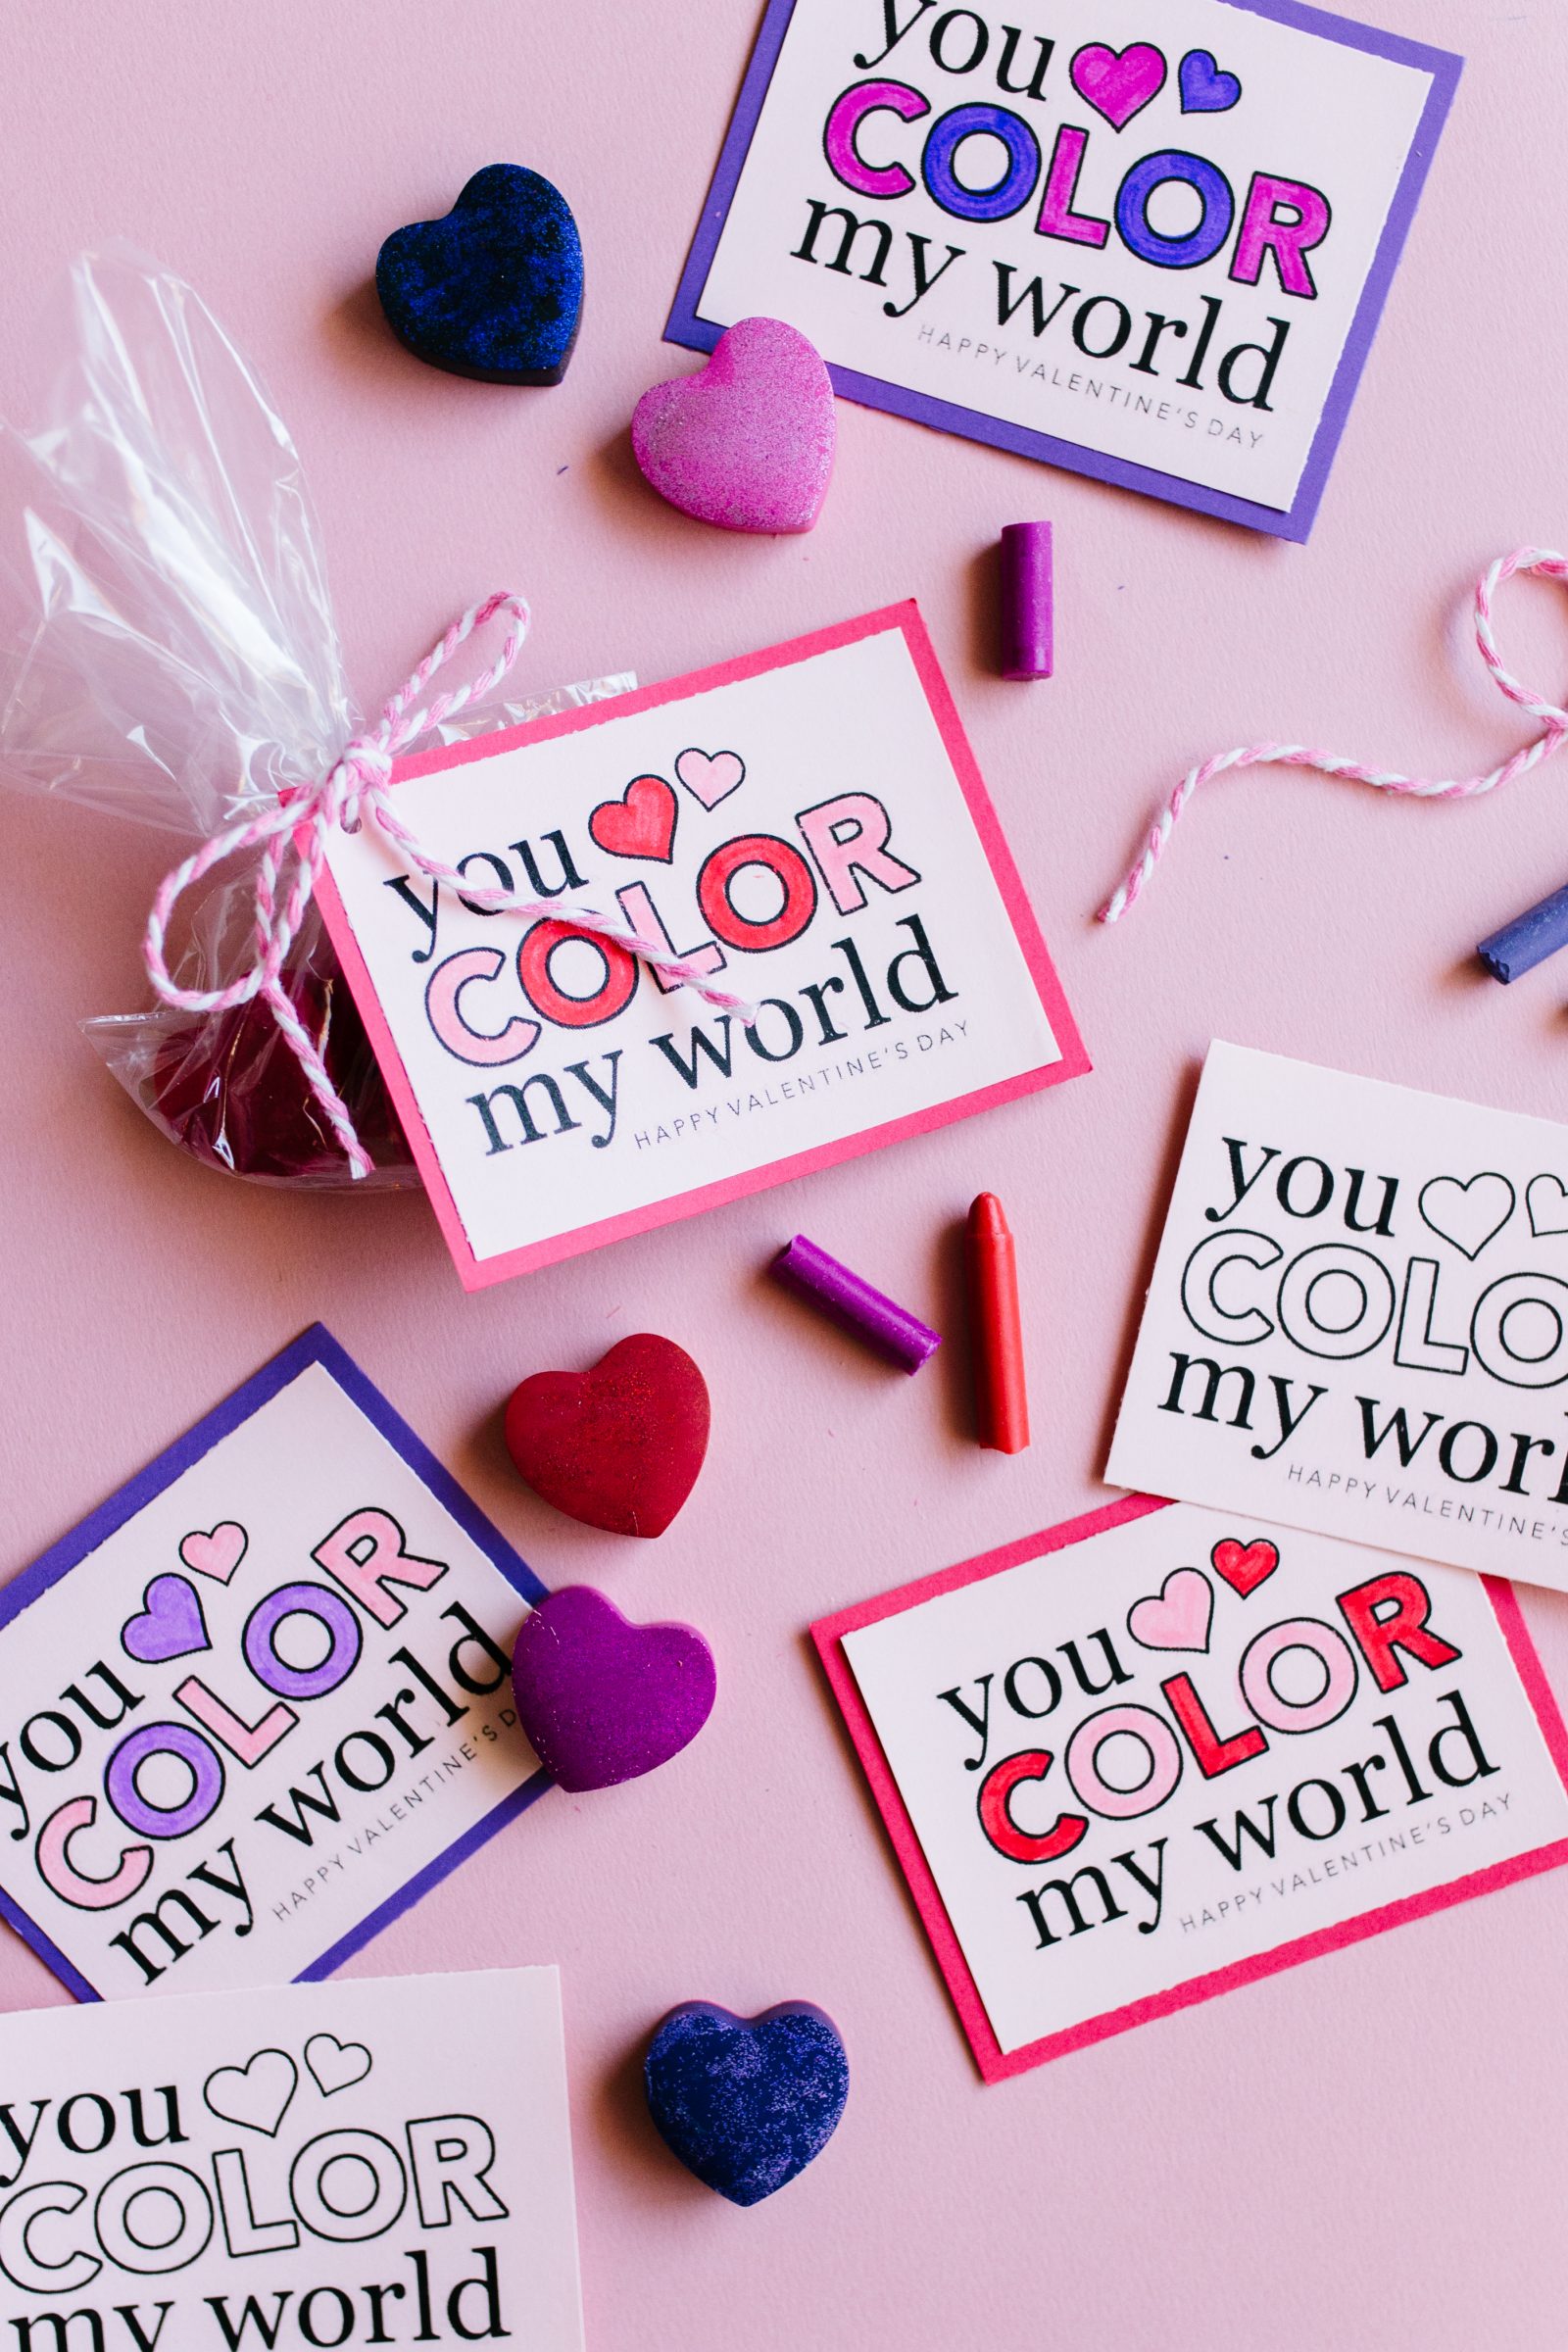 Valentines Day Crafts: Silicone Mold Melted Crayon Hearts + a tutorial featured by Top US Craft Blog + The Pretty Life Girls